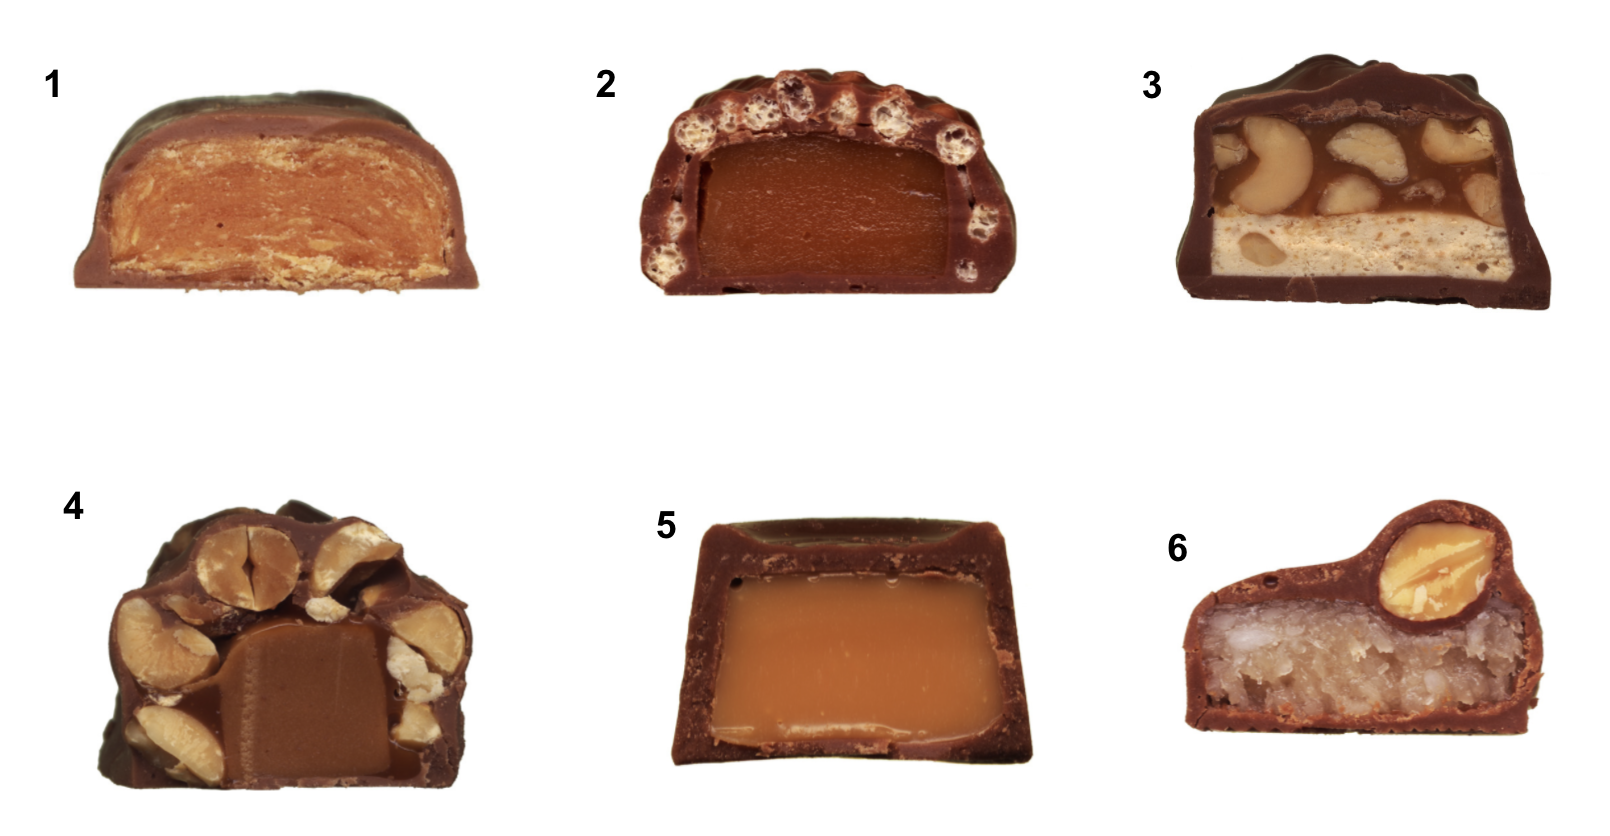 Candy bar cross-sections